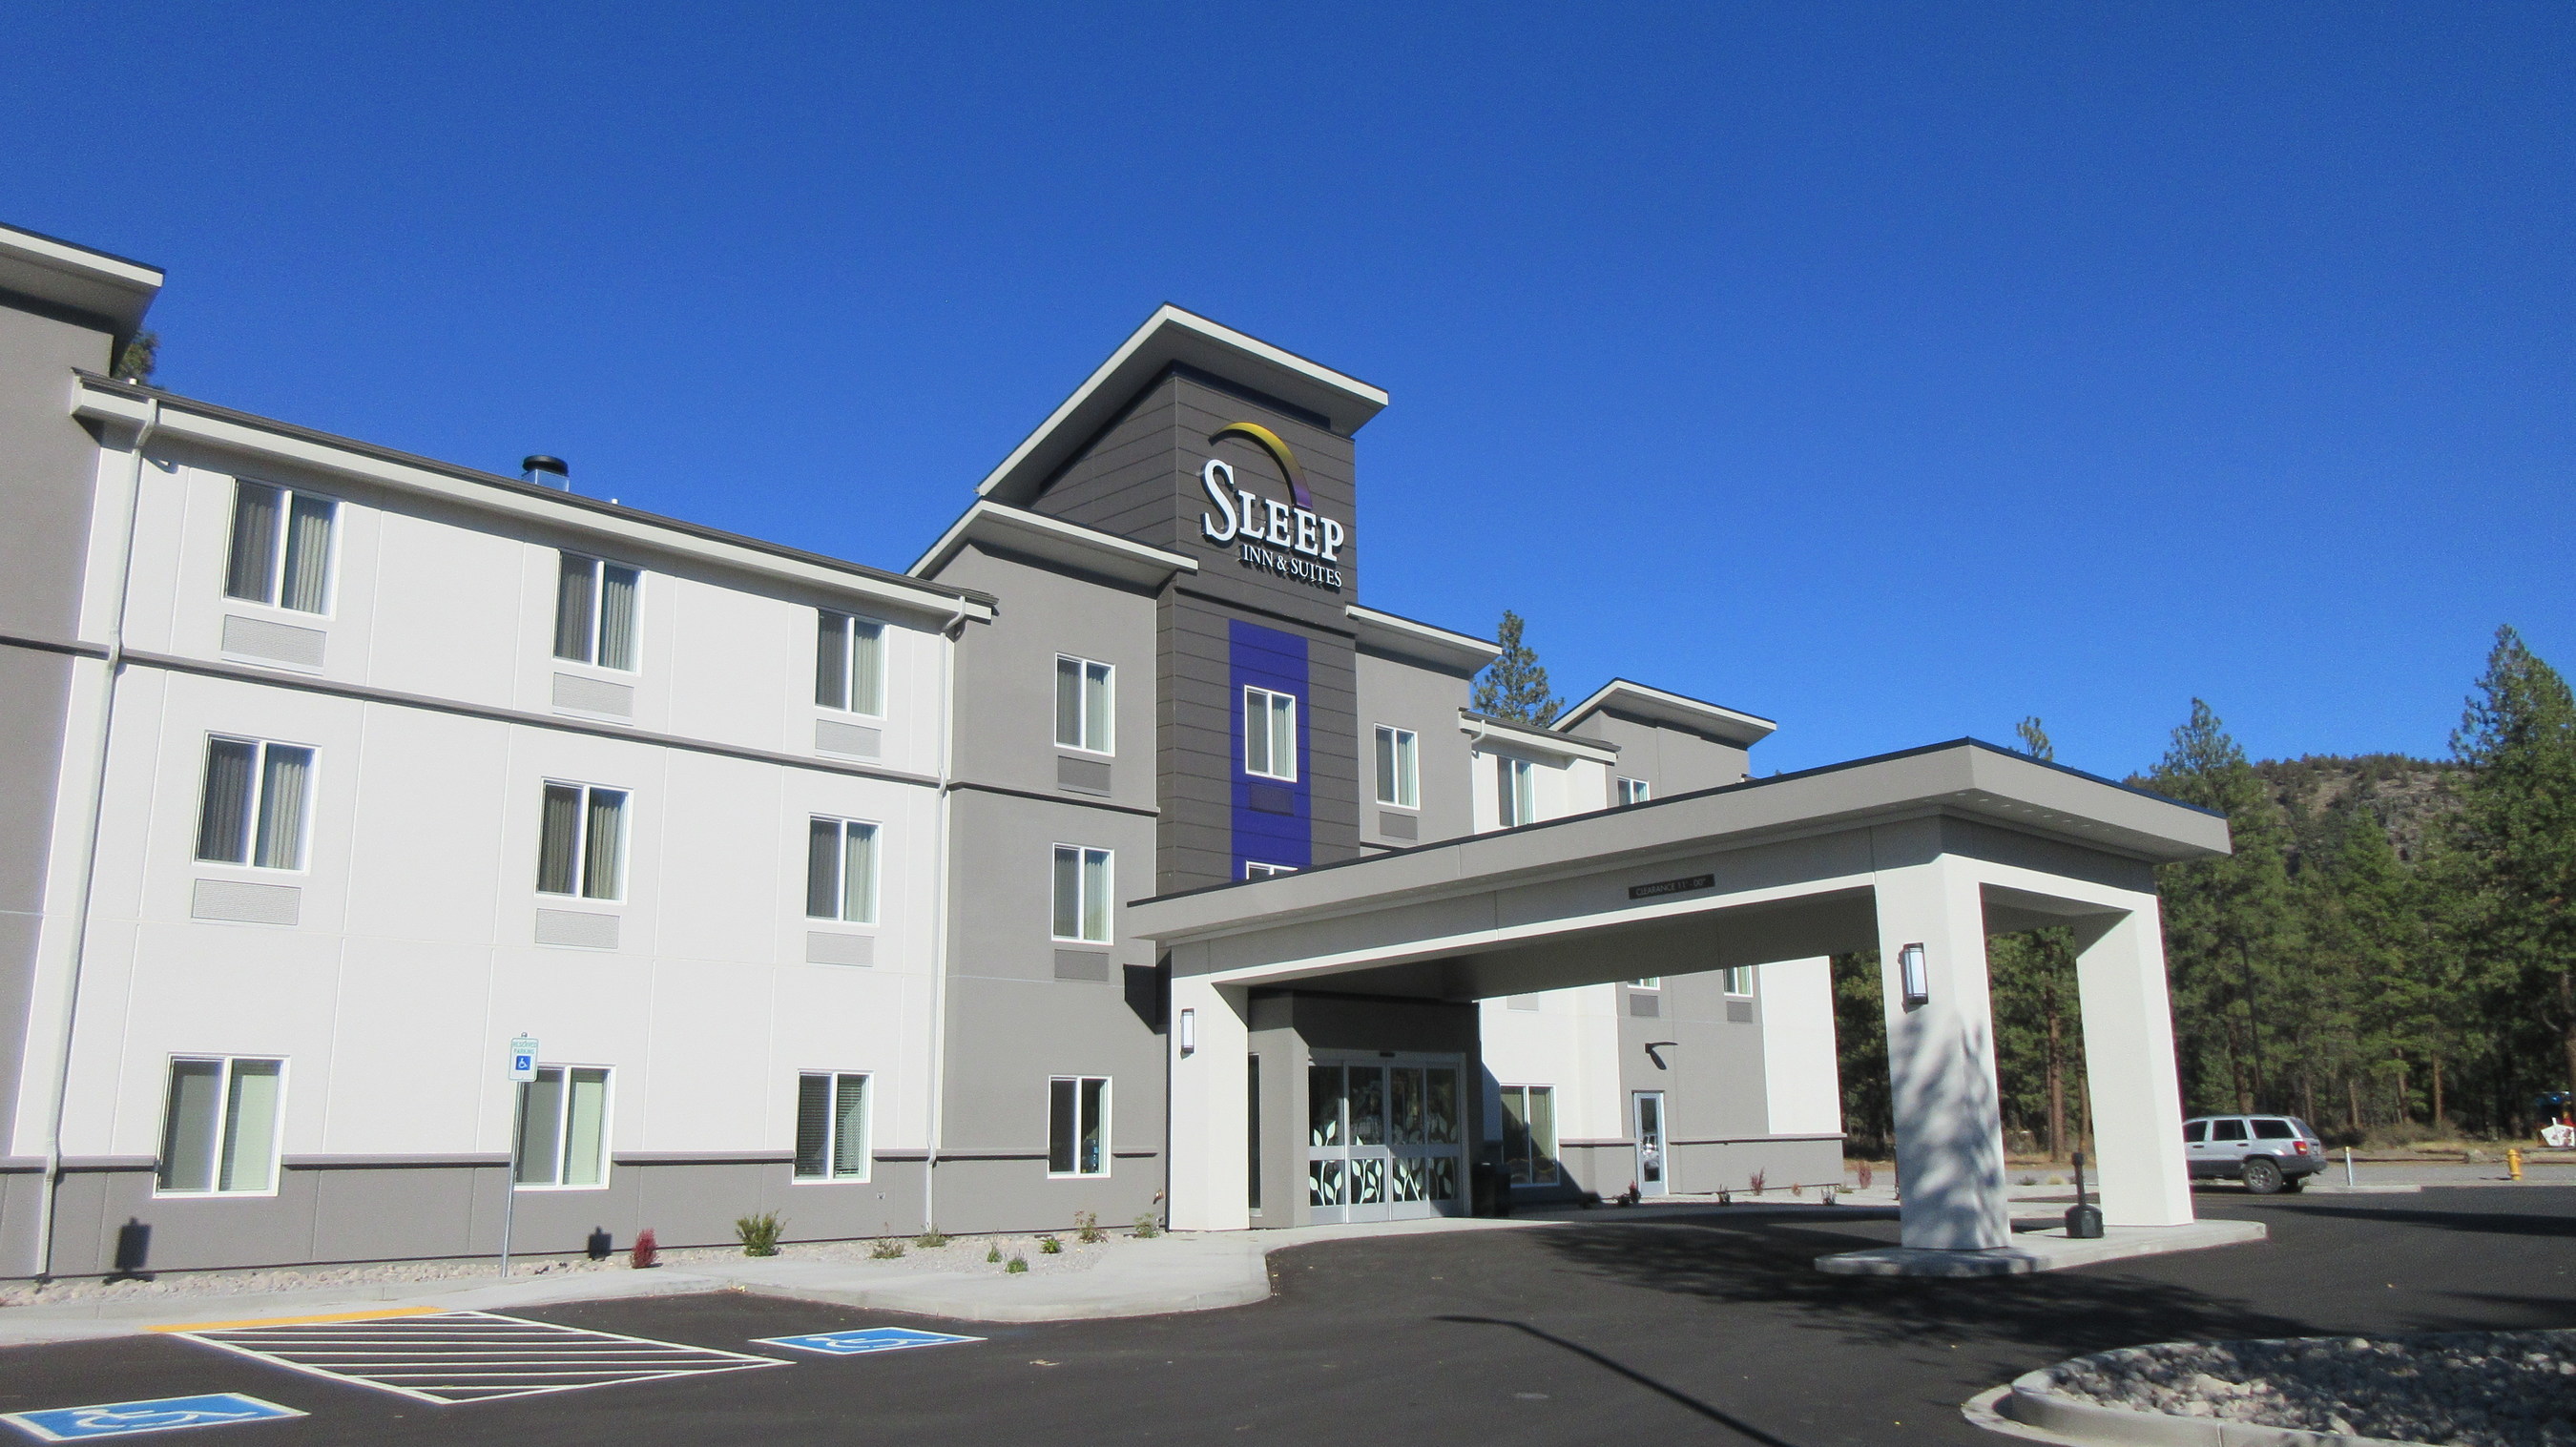 The Sleep Inn brand has nearly 550 properties open or in the pipeline globally with hotels that have opened this year in Hou